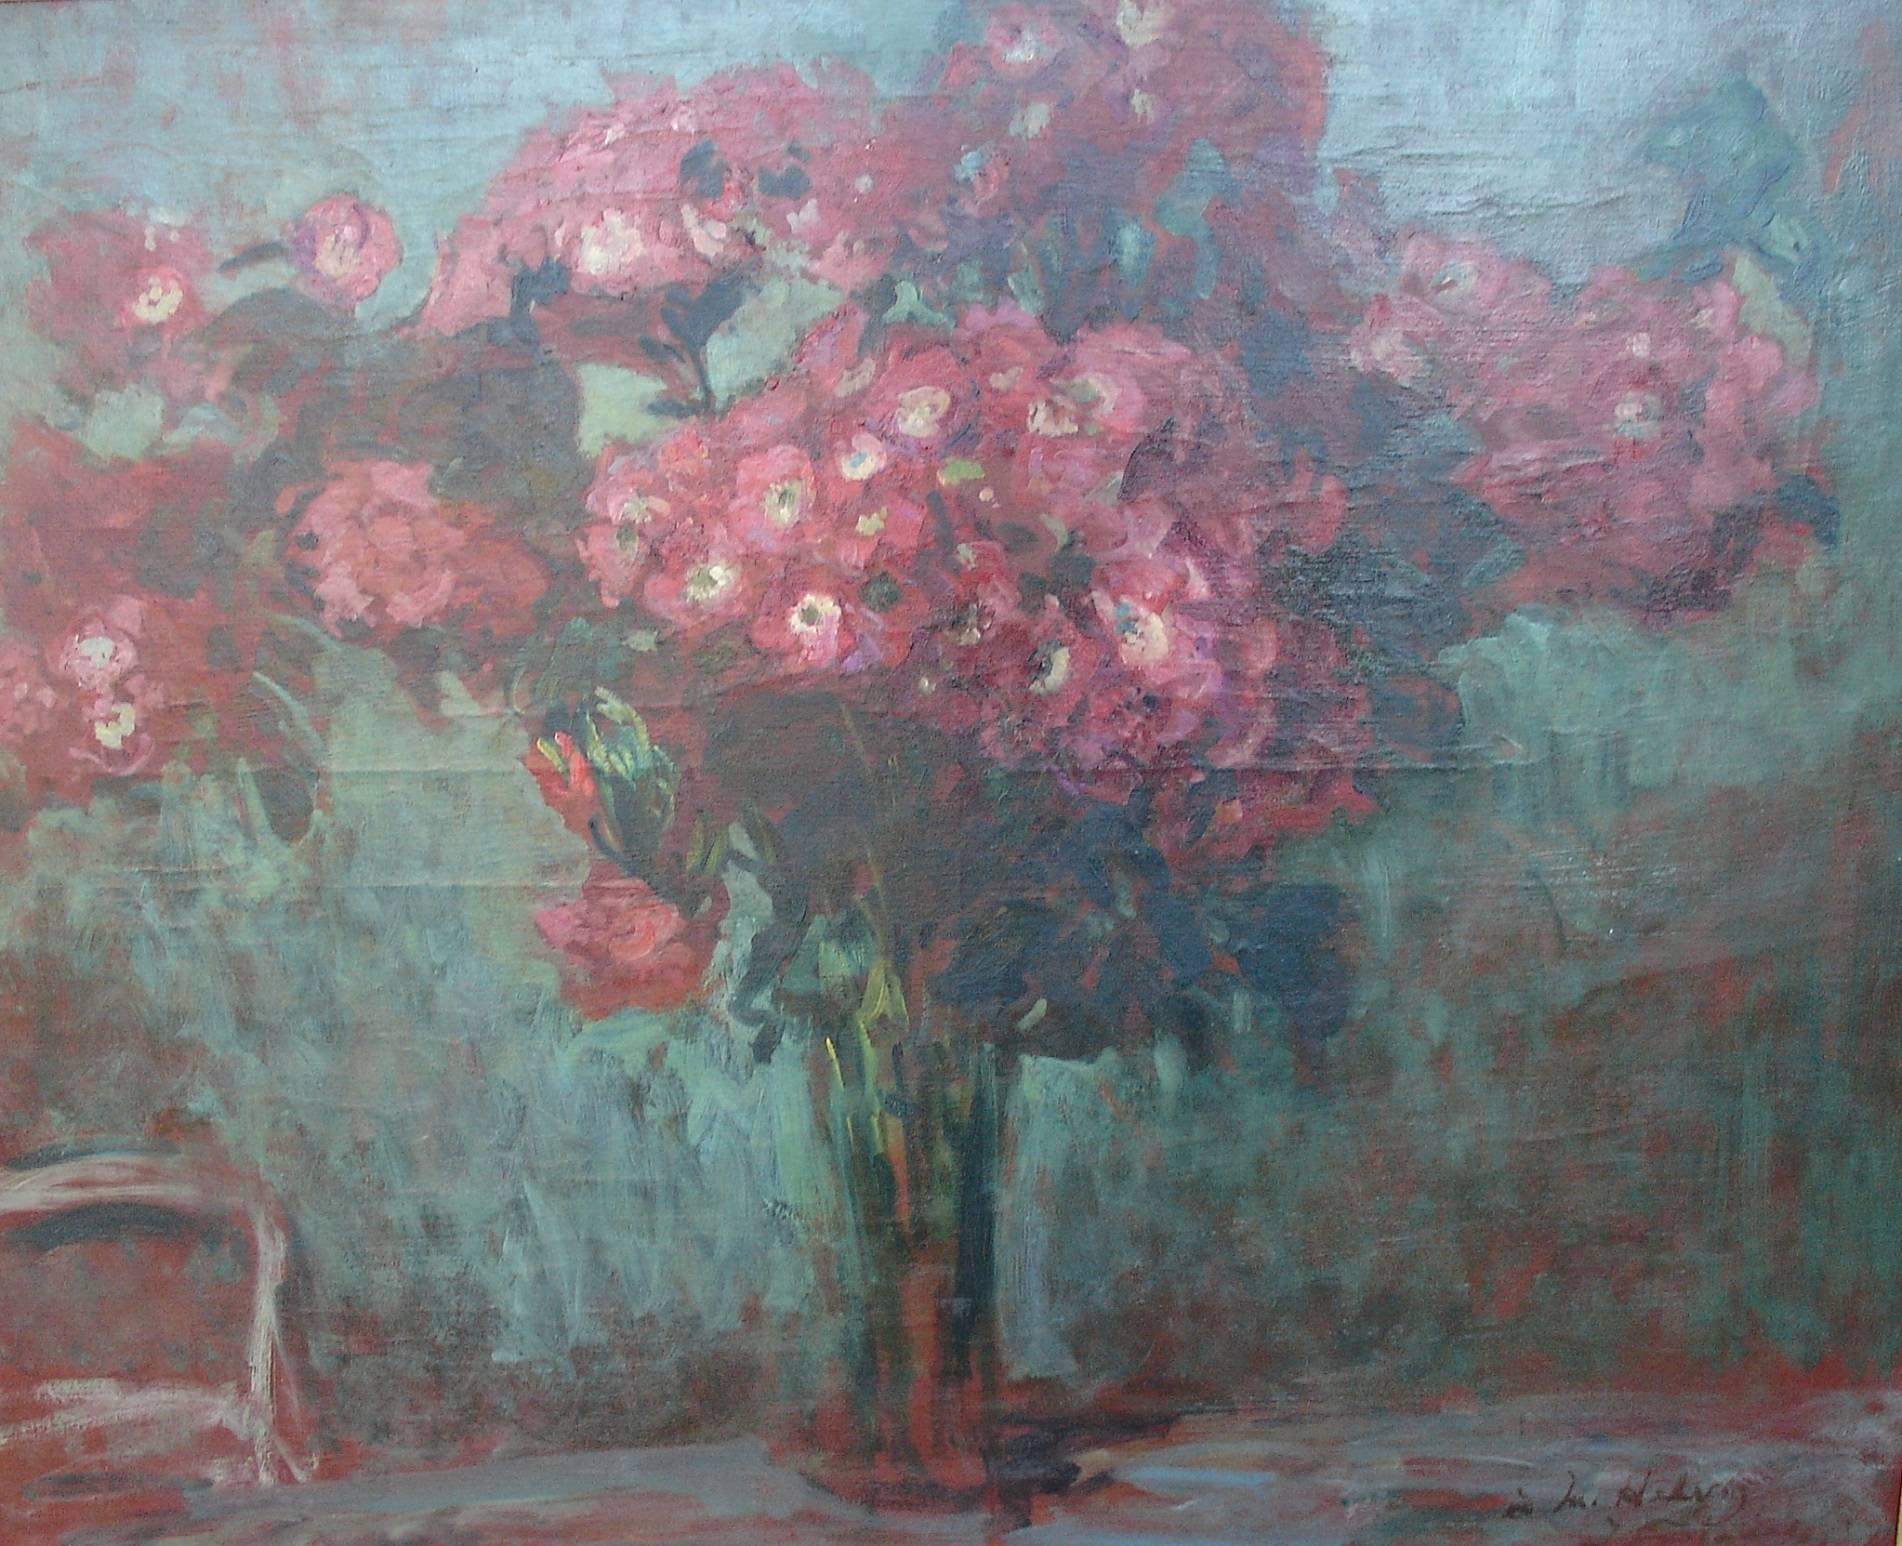 Large Bouquet of Red Flowers - Post-Impressionist Painting by Jacques Emile Blanche